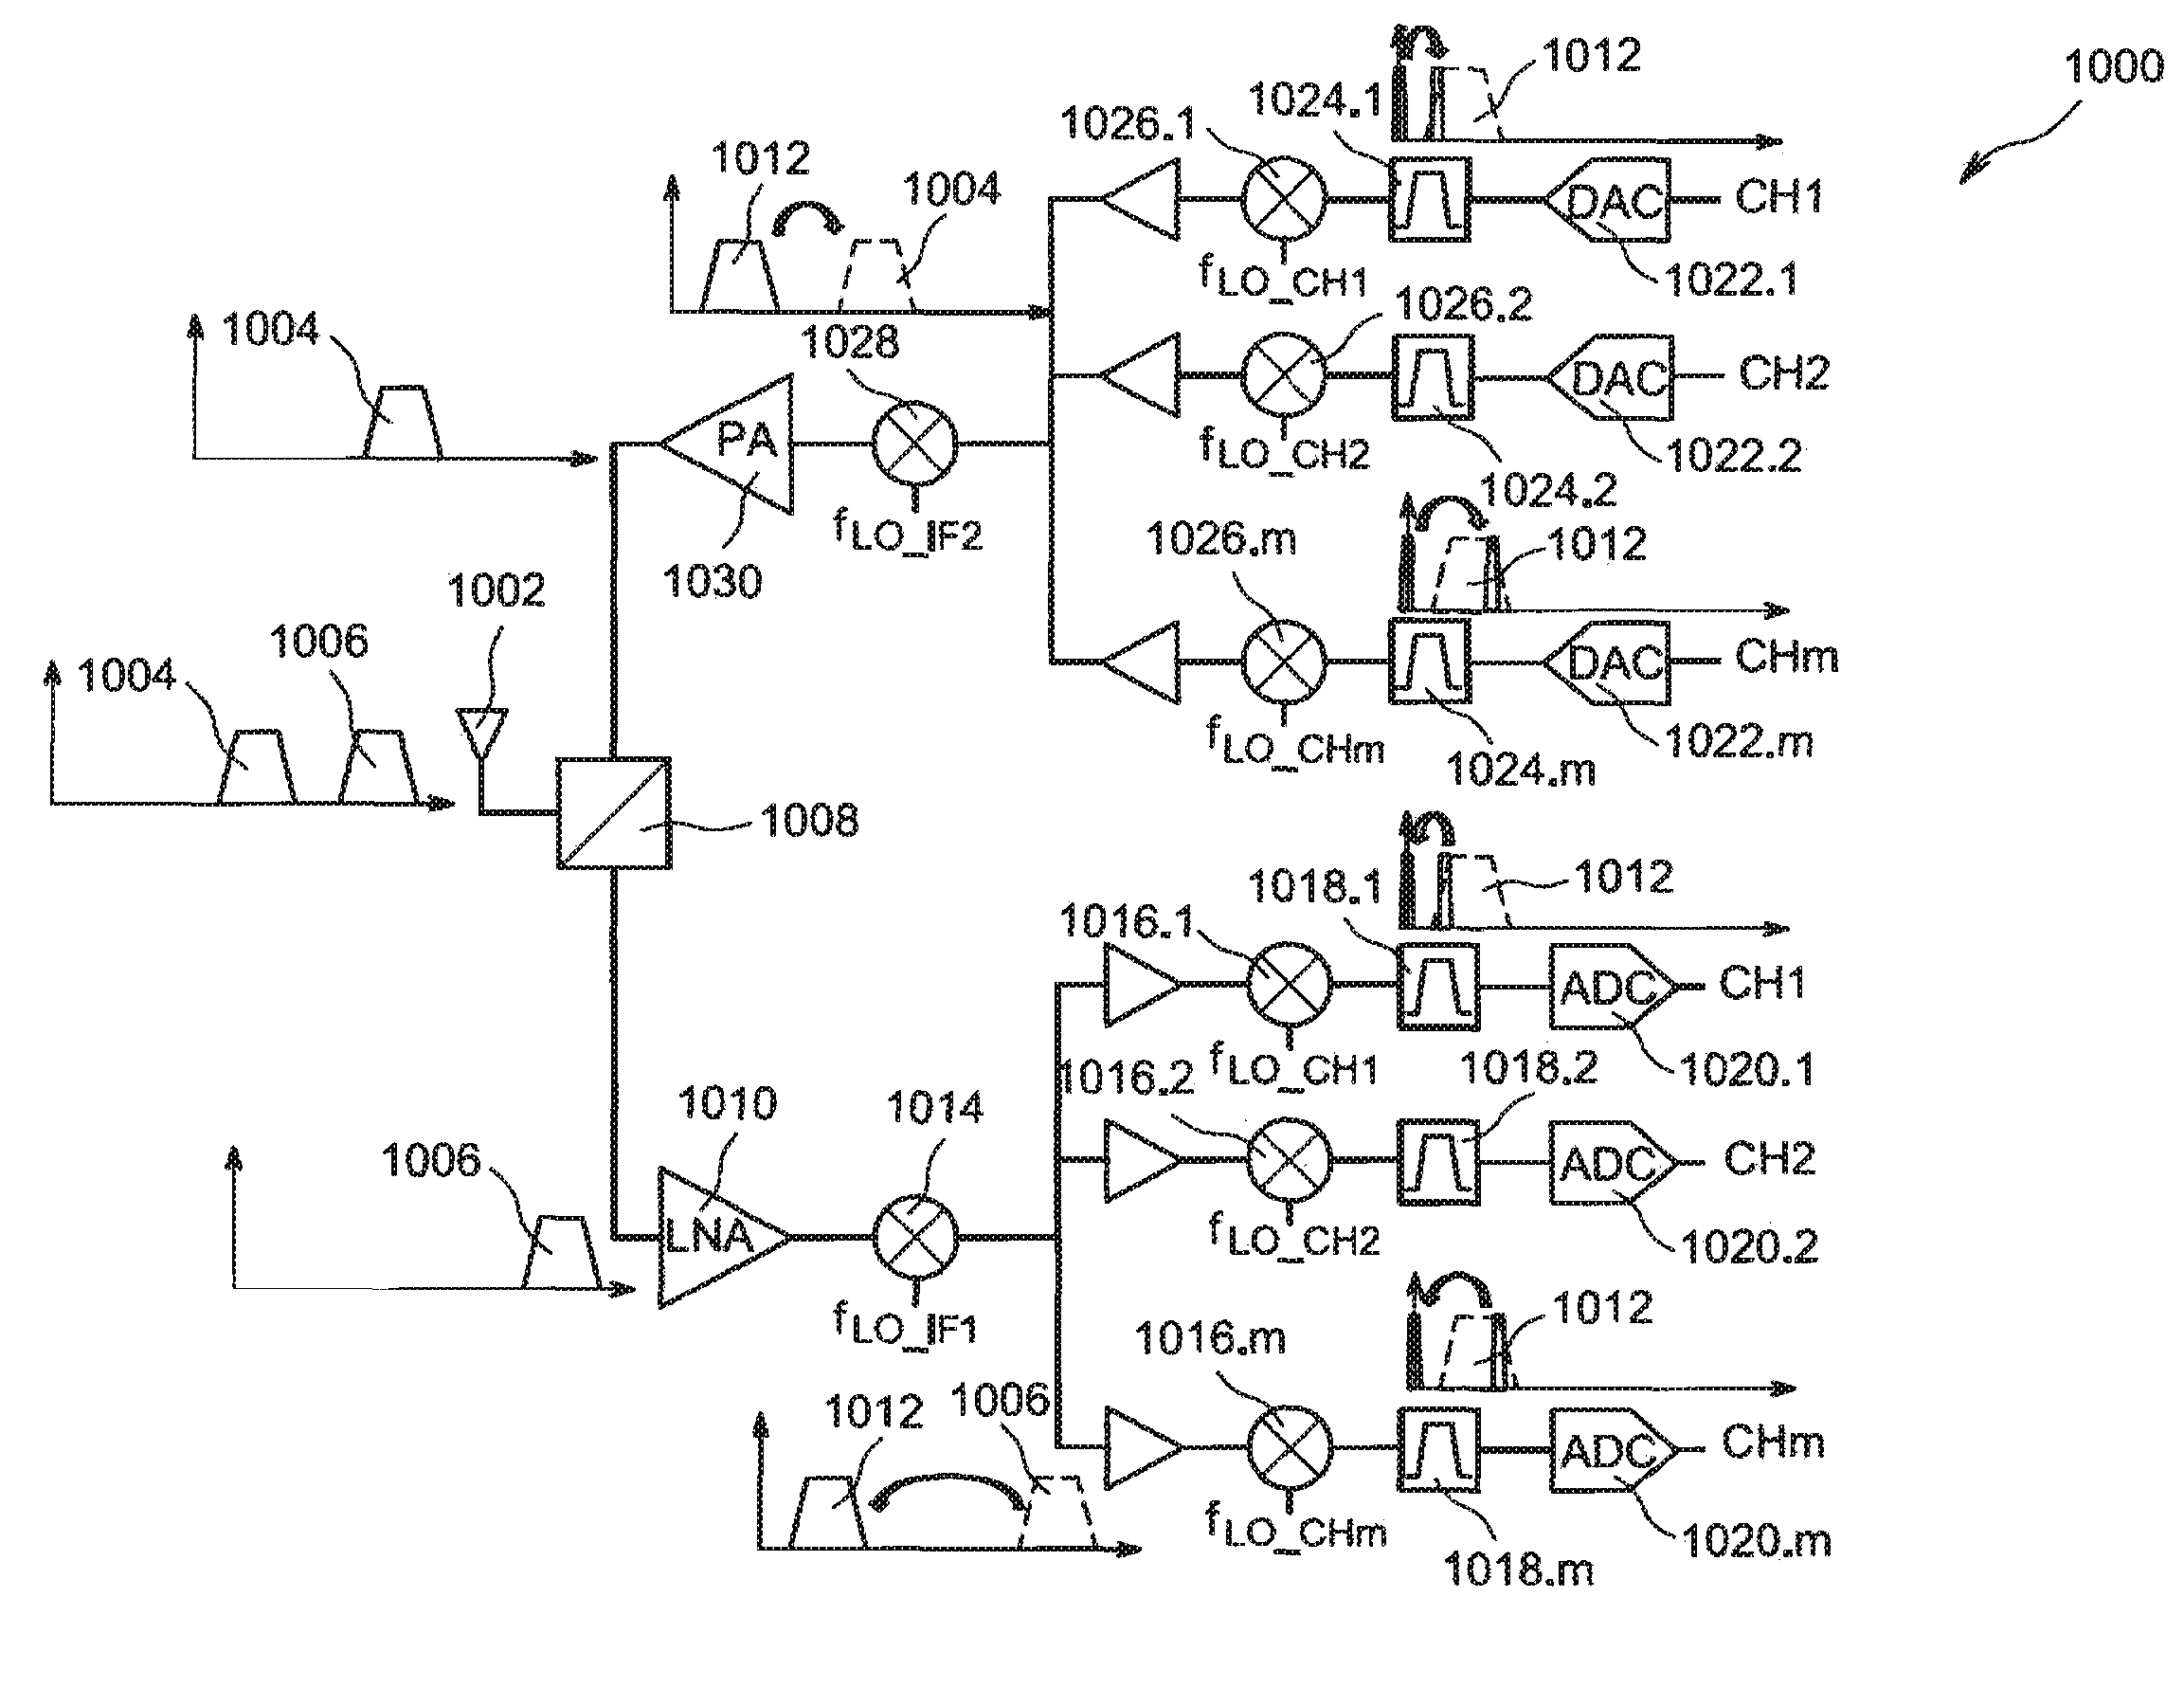 Frequency synthesis device and method